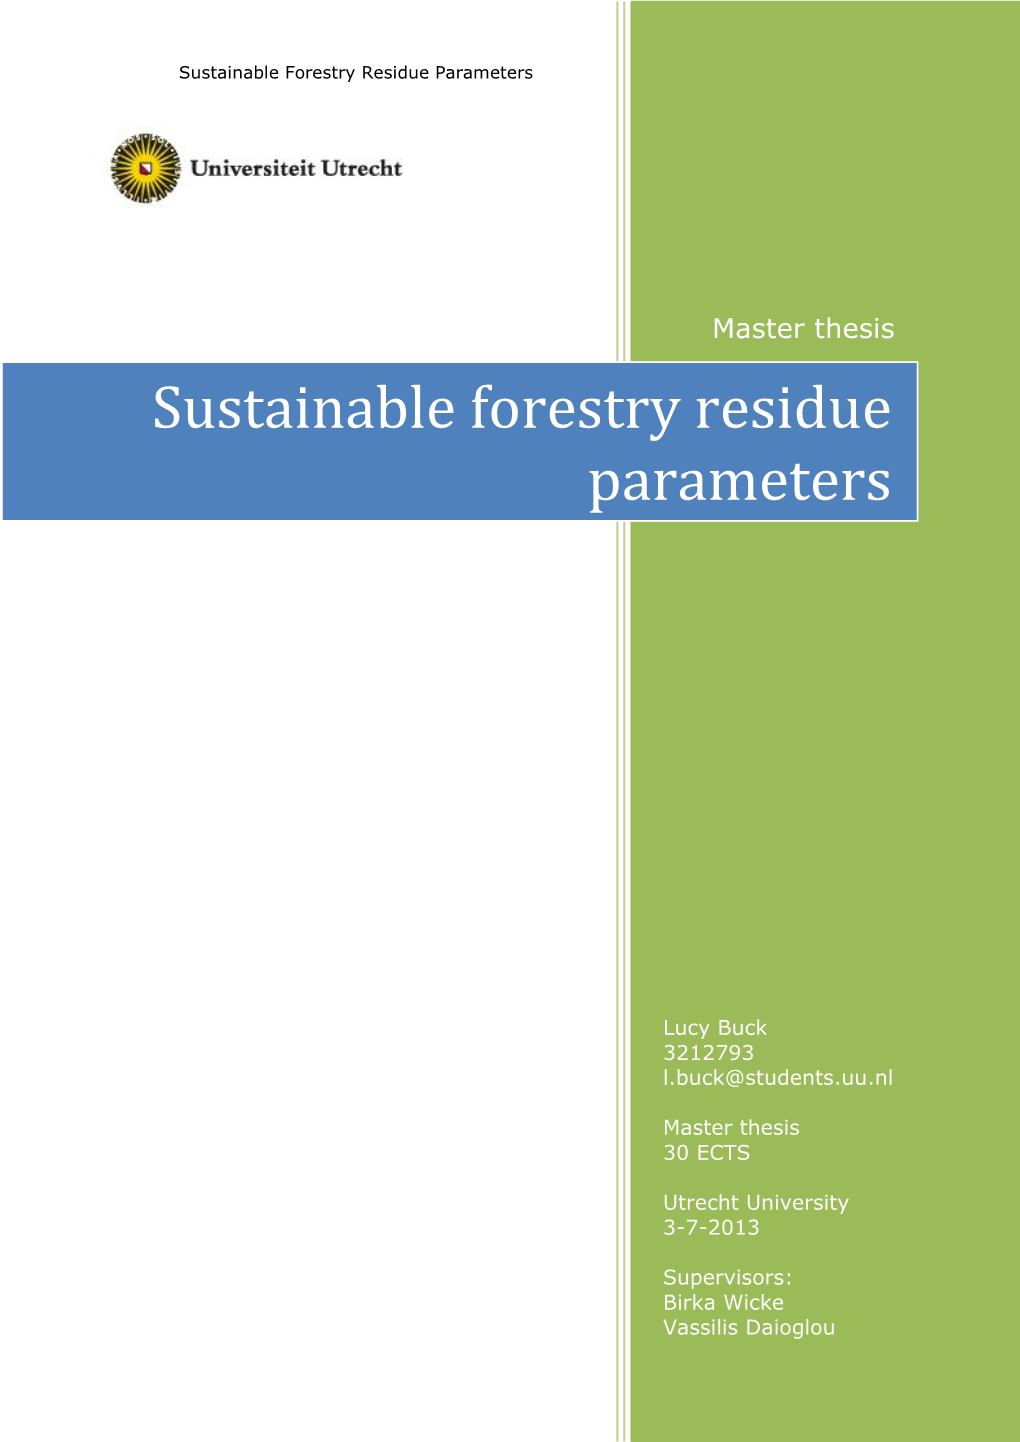 Sustainable Forestry Residue Parameters Lucy Buck